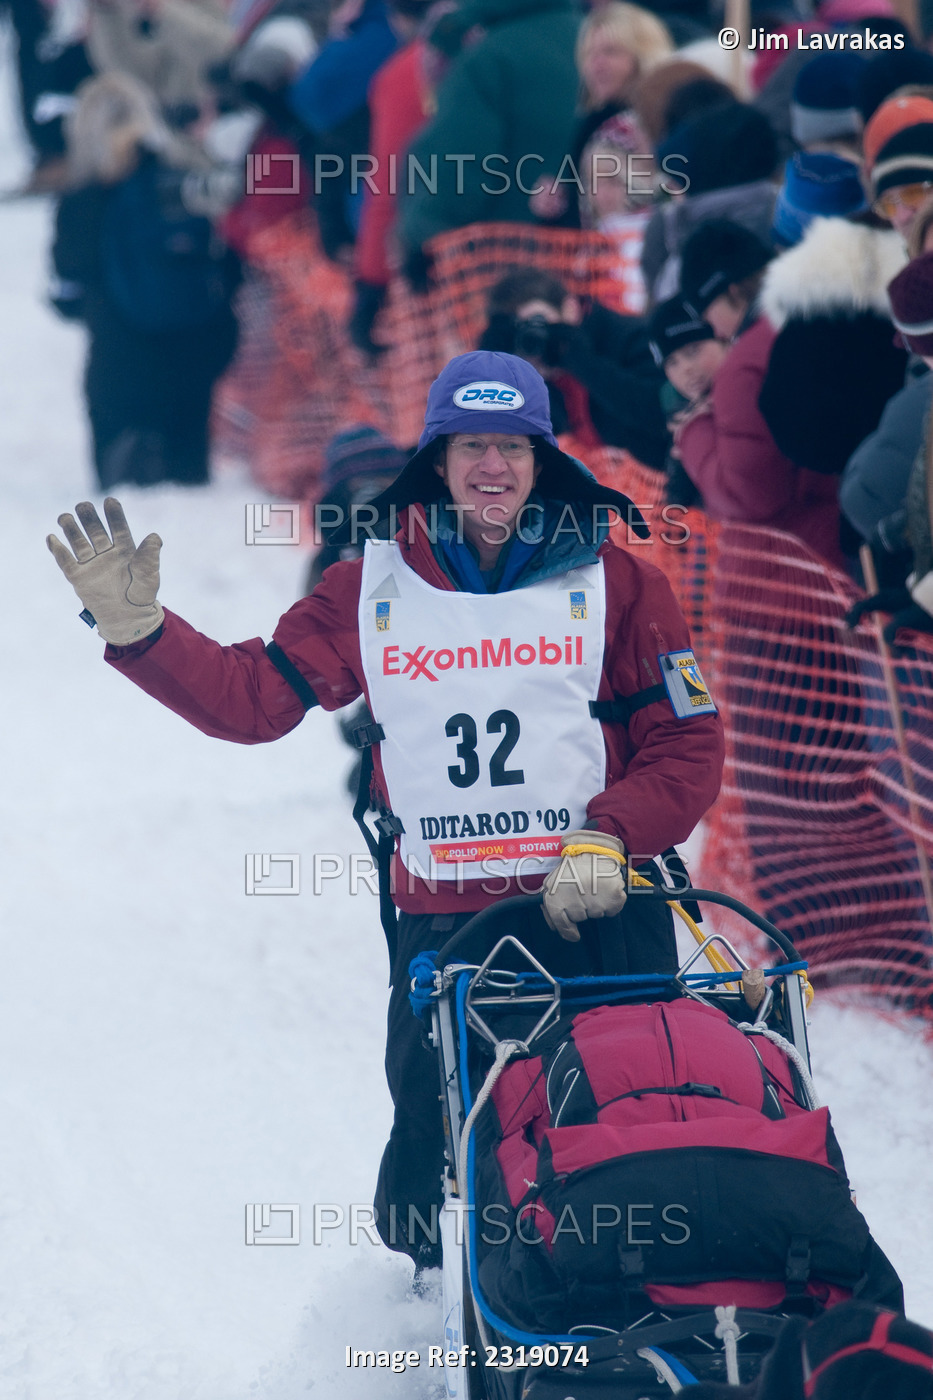 Alan Peck Team Leaves The Start Line During The Restart Day Of Iditarod 2009 In ...